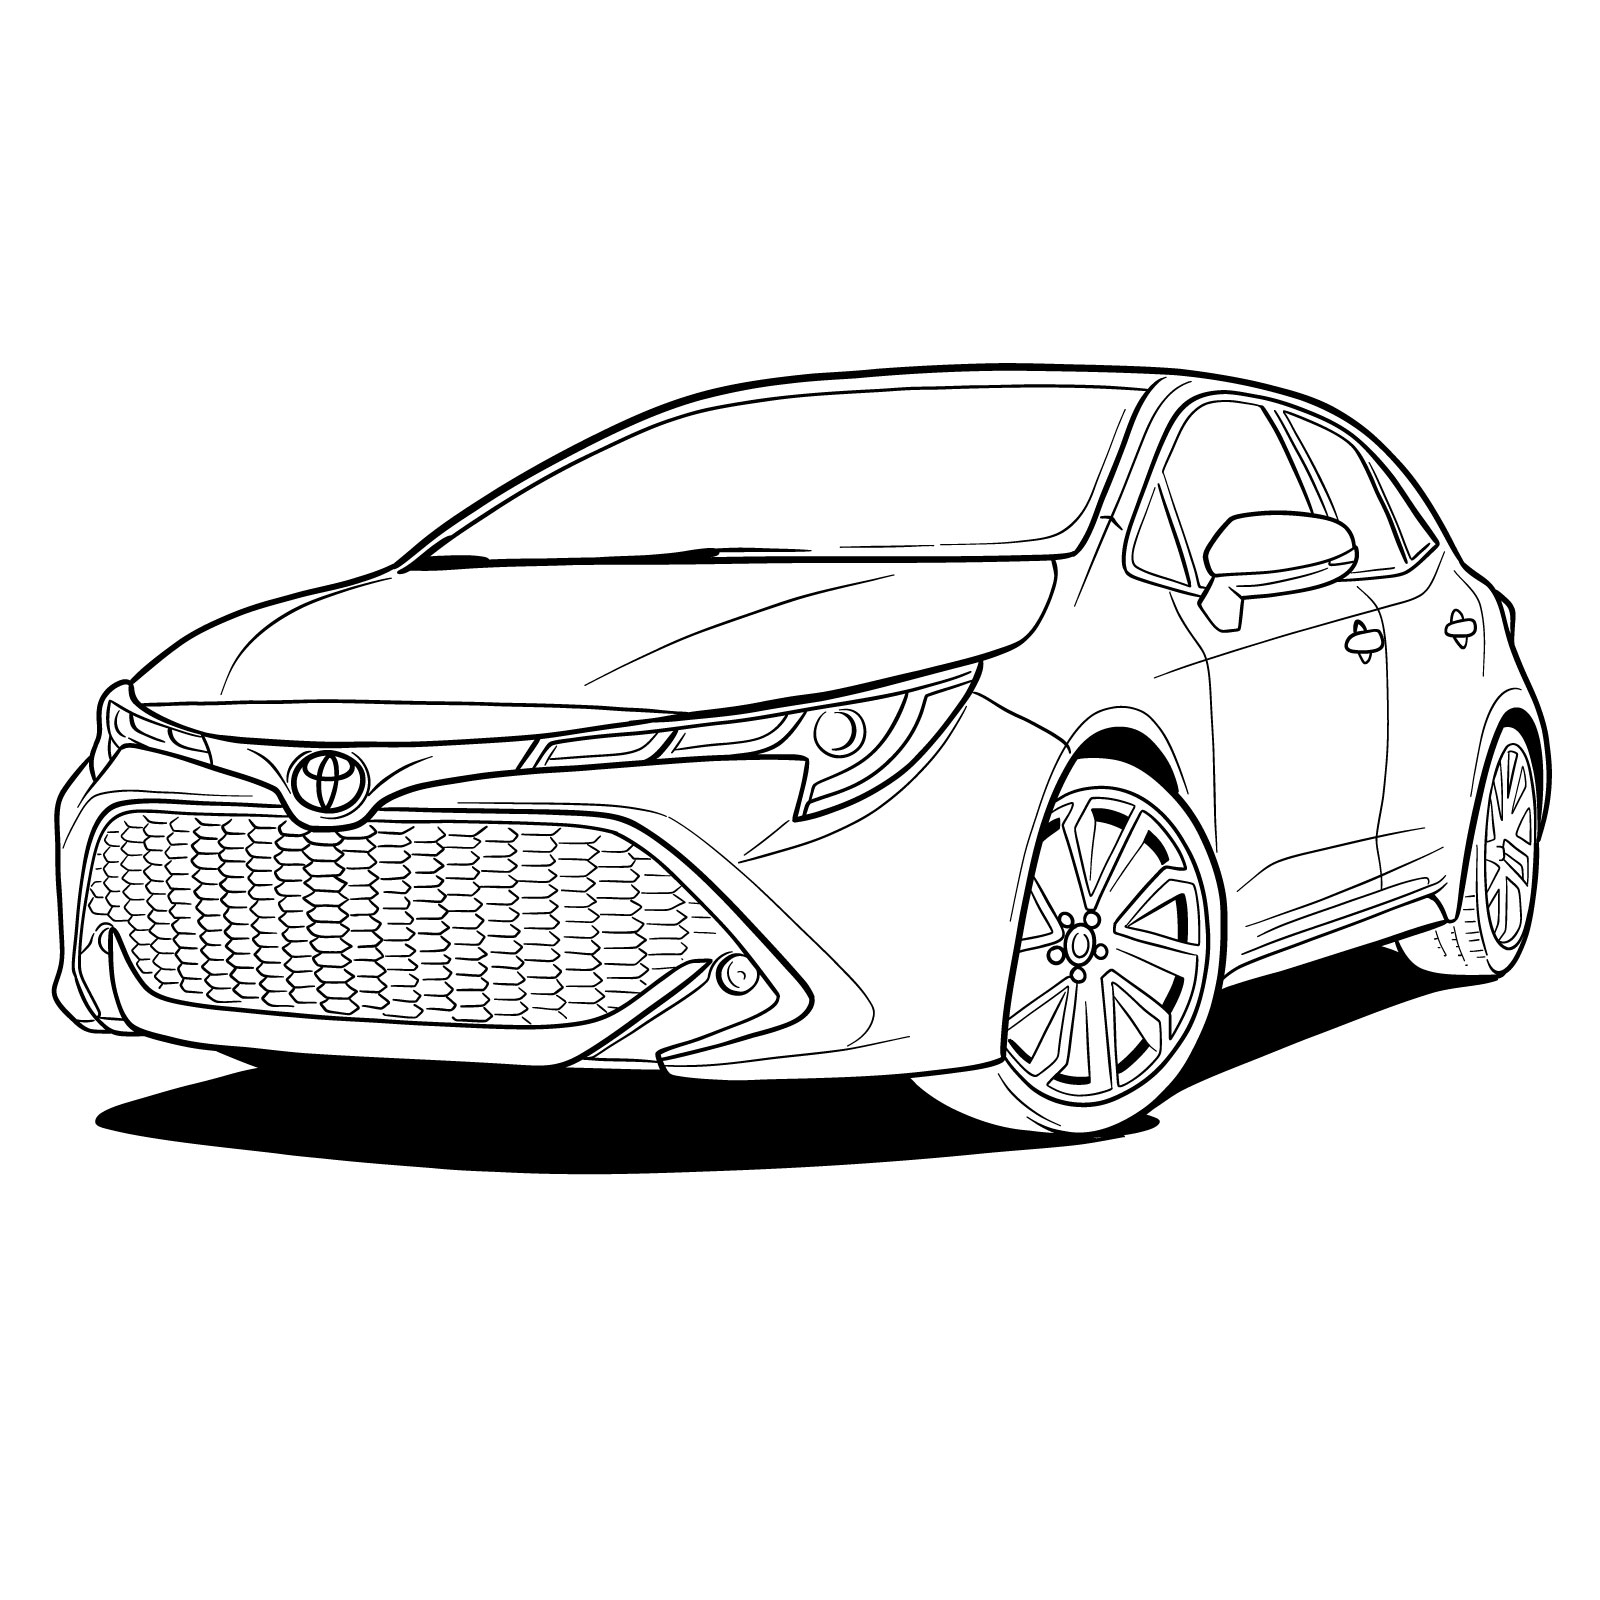 How to draw a 2021 Toyota Corolla - final step